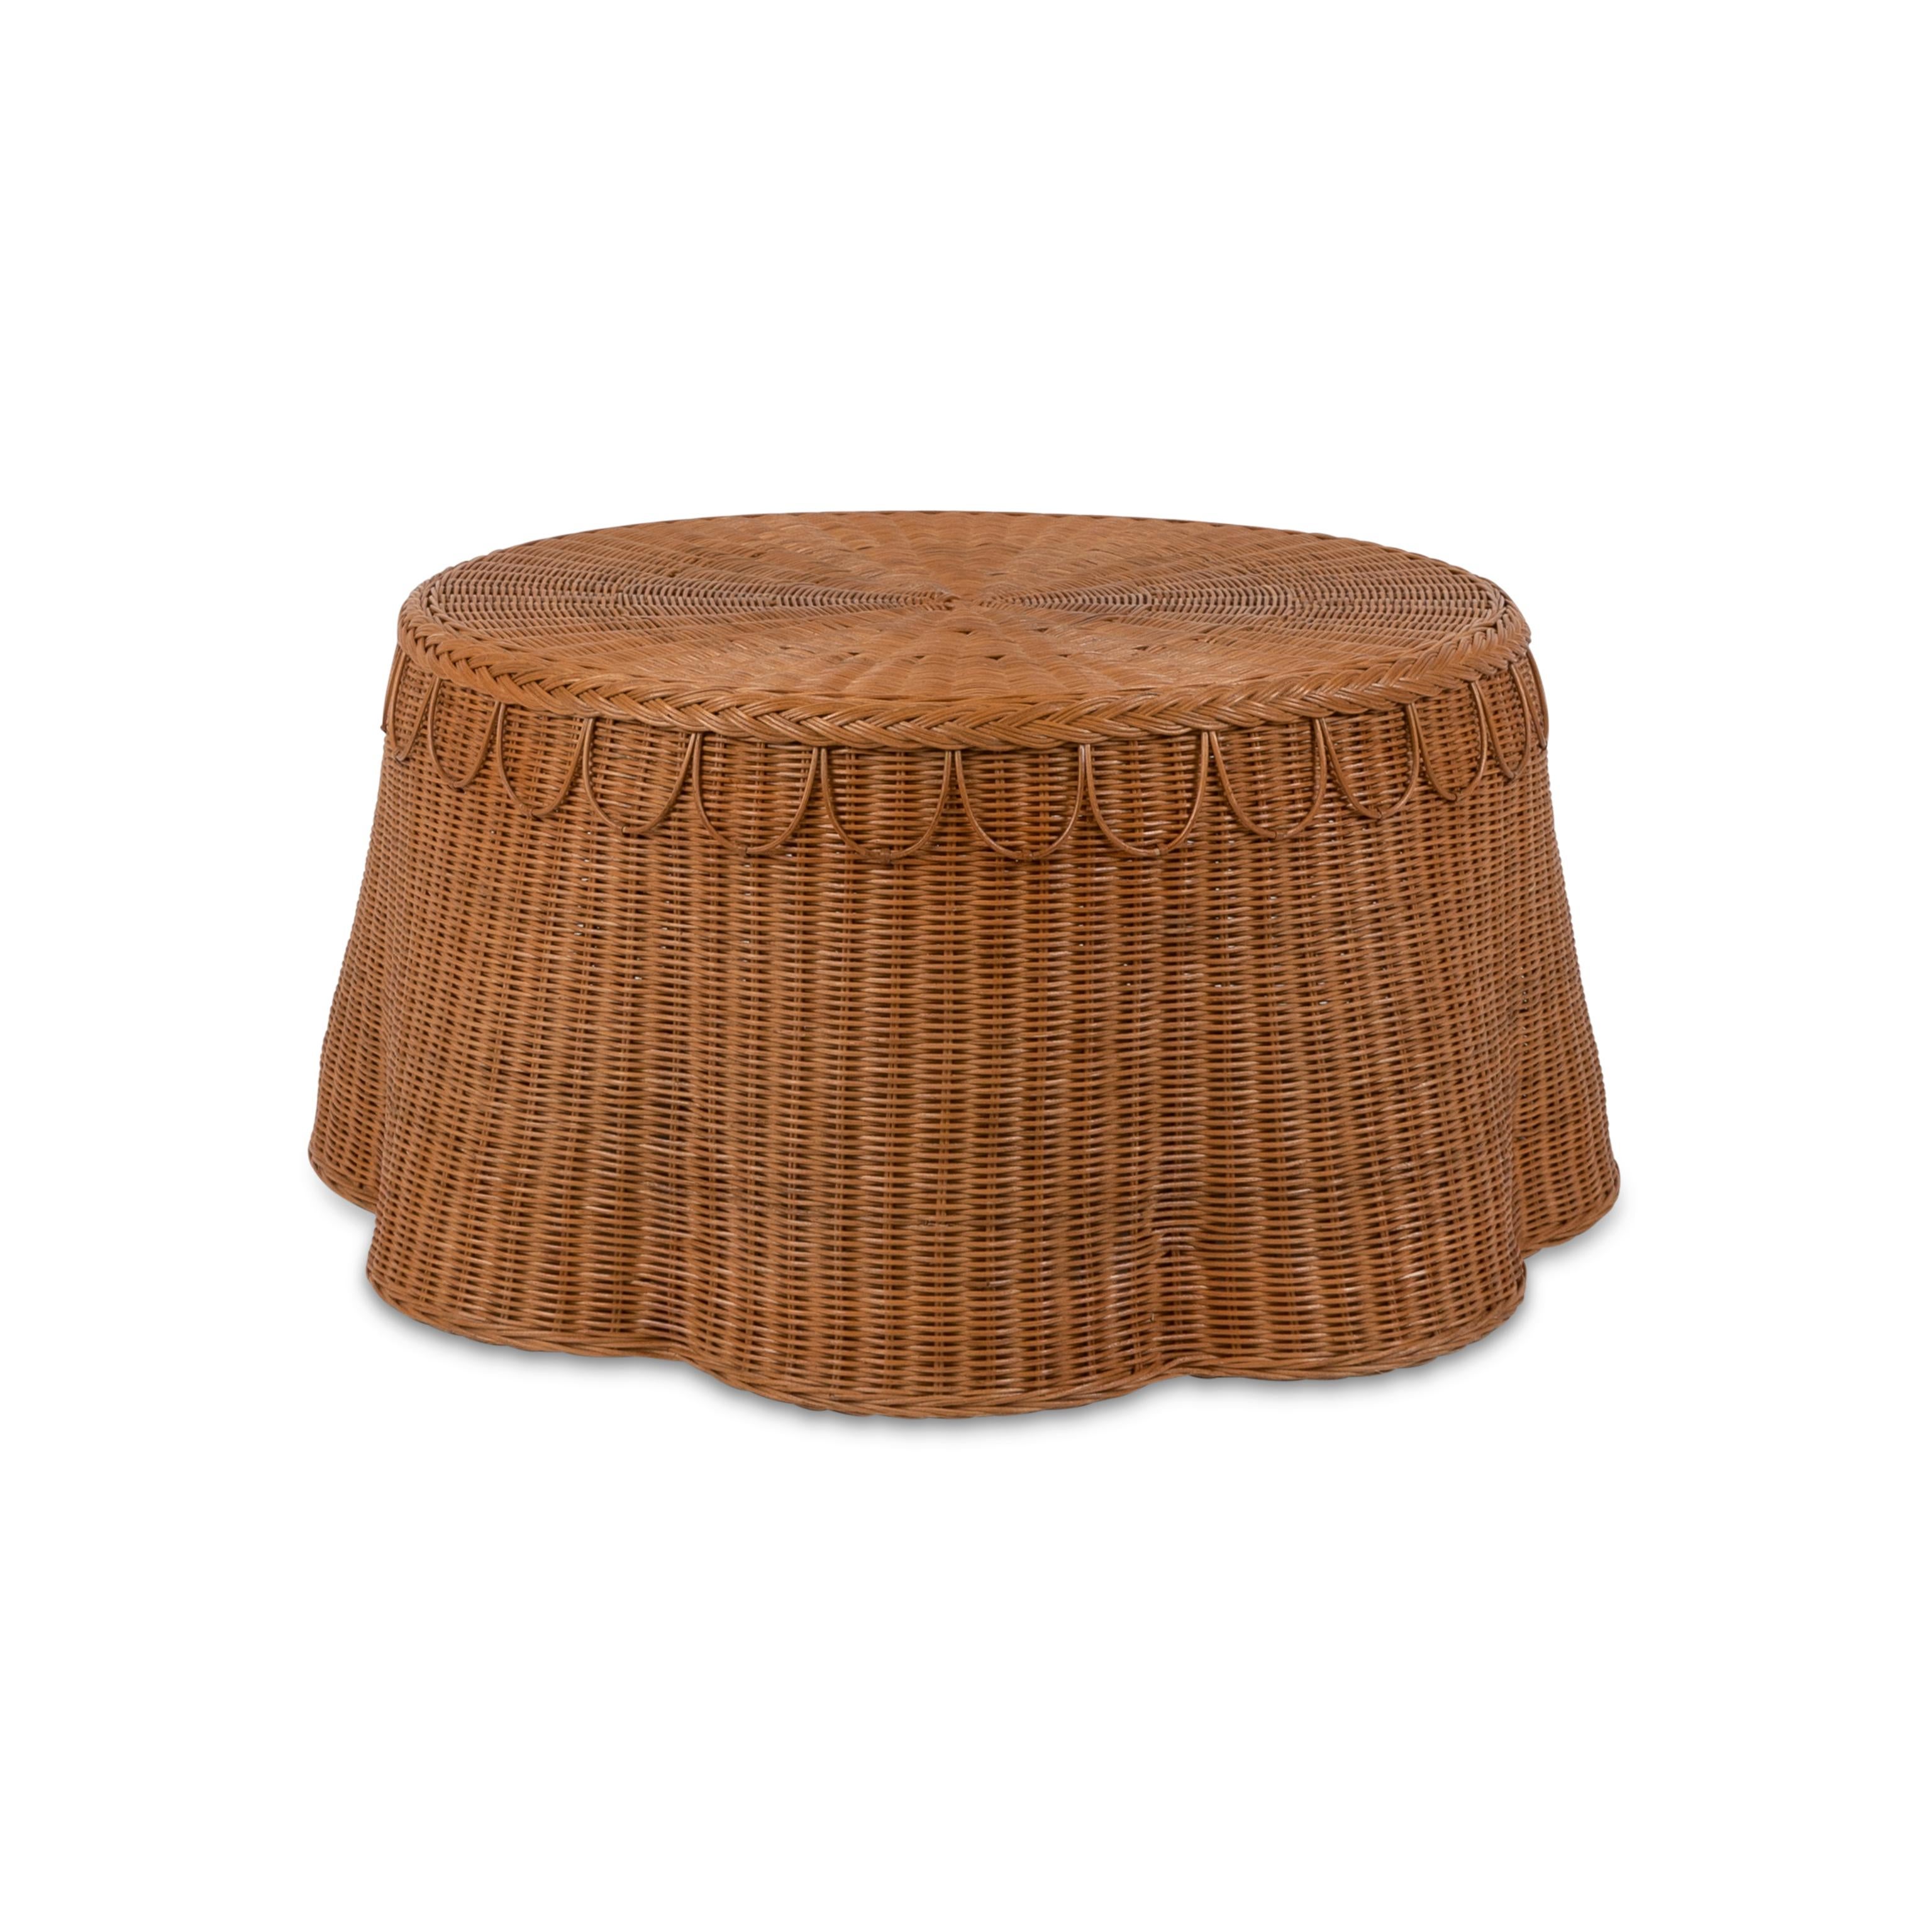 Contemporary Adeline Coffee Table in Natural Honey Rattan, Modern furniture by Louise Roe